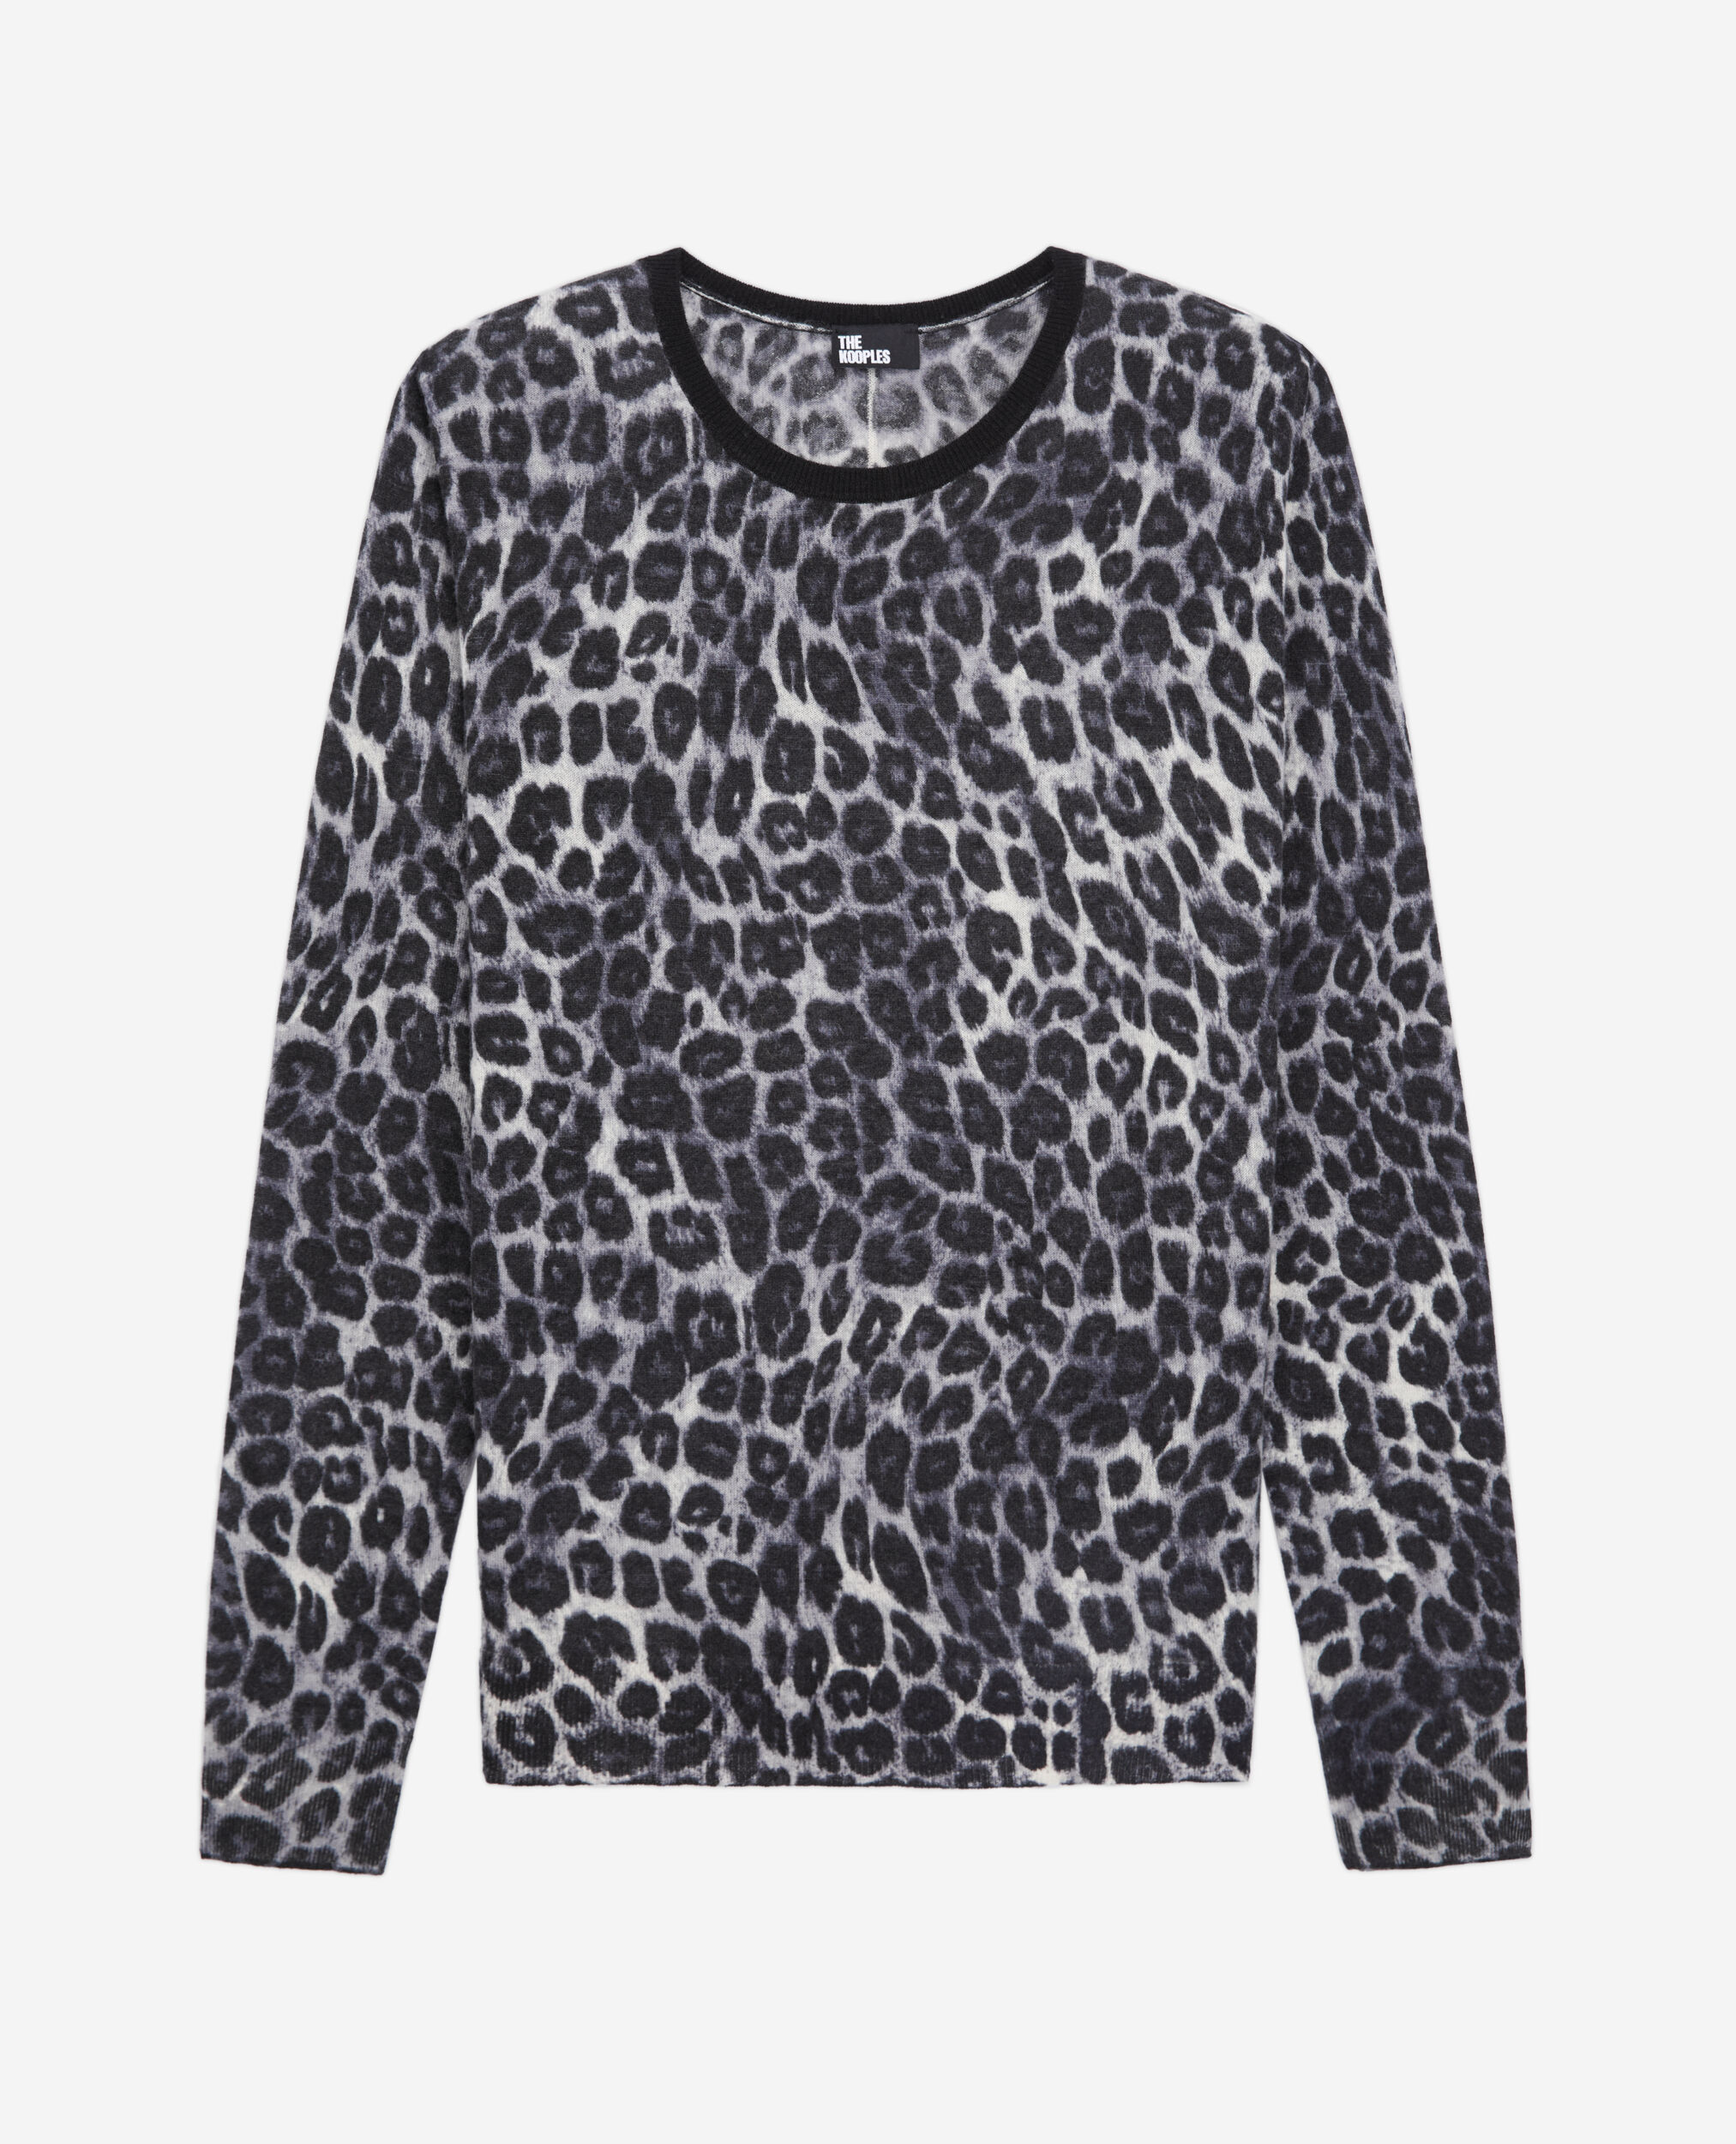 Printed cashmere sweater, BLACK WHITE LEOPARD, hi-res image number null